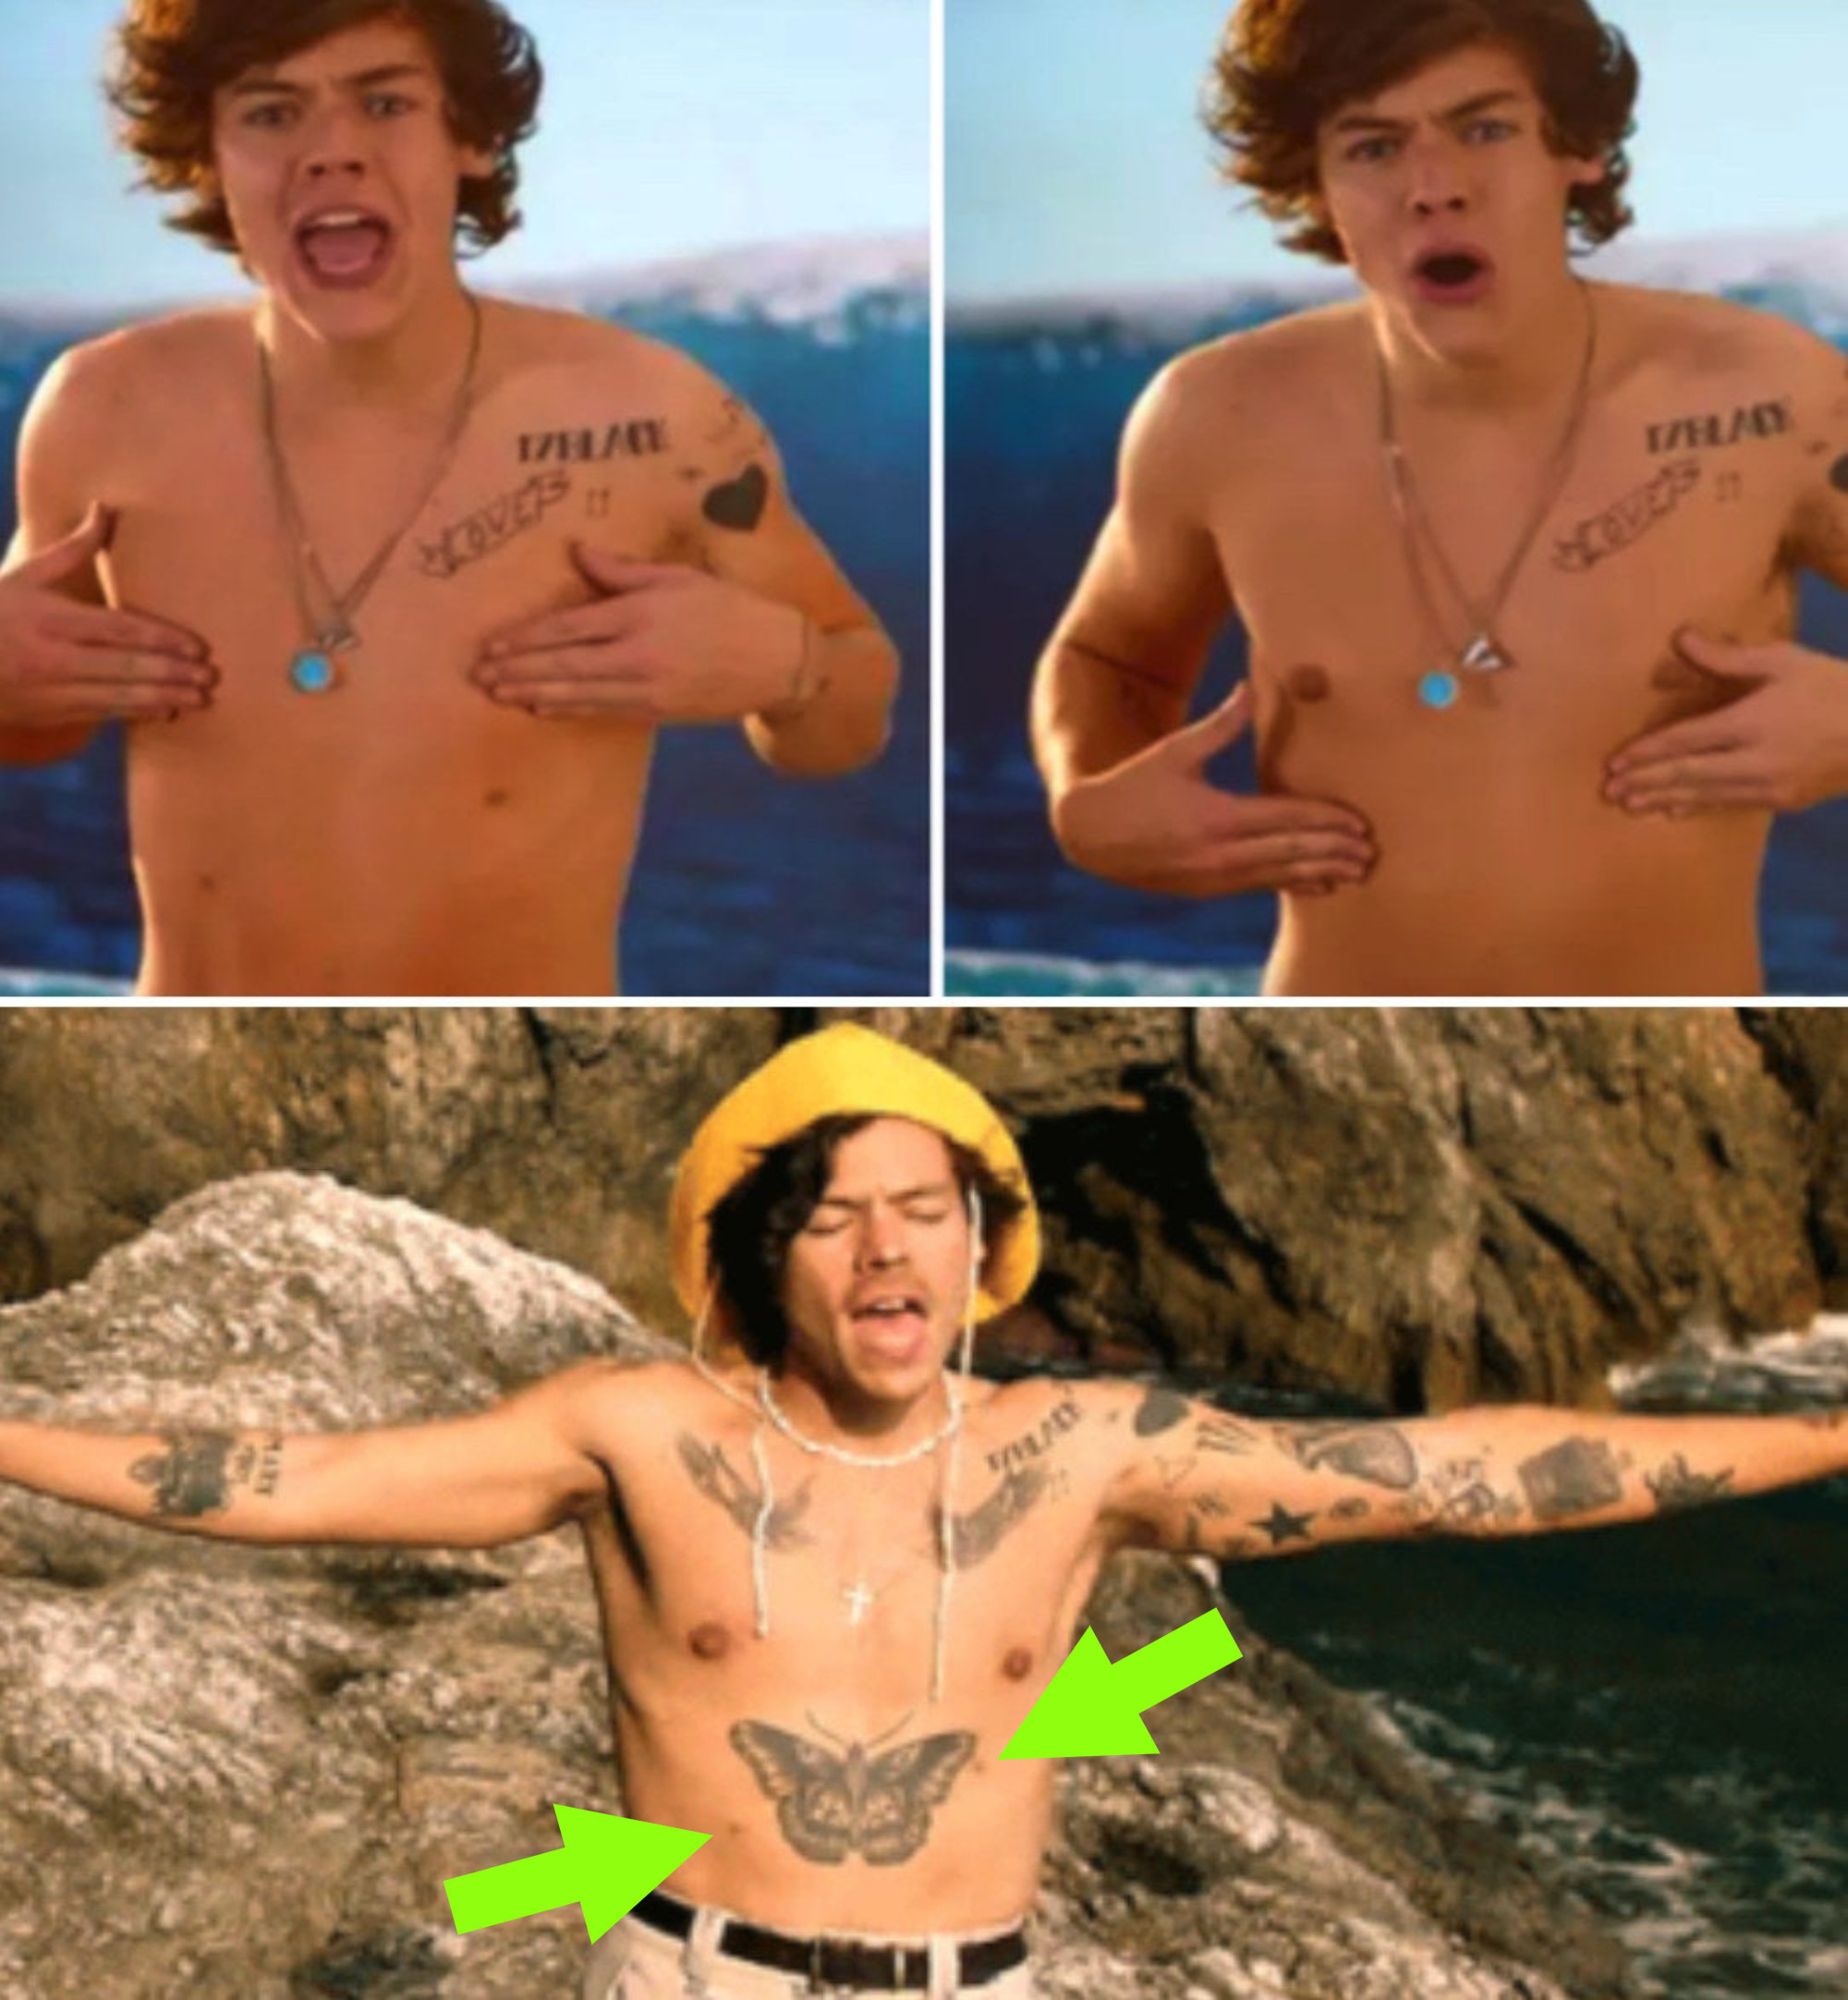 Three shirtless photos of Harry Styles that show he has two &#x27;regular&#x27; nipples, and then two lower down on his chest